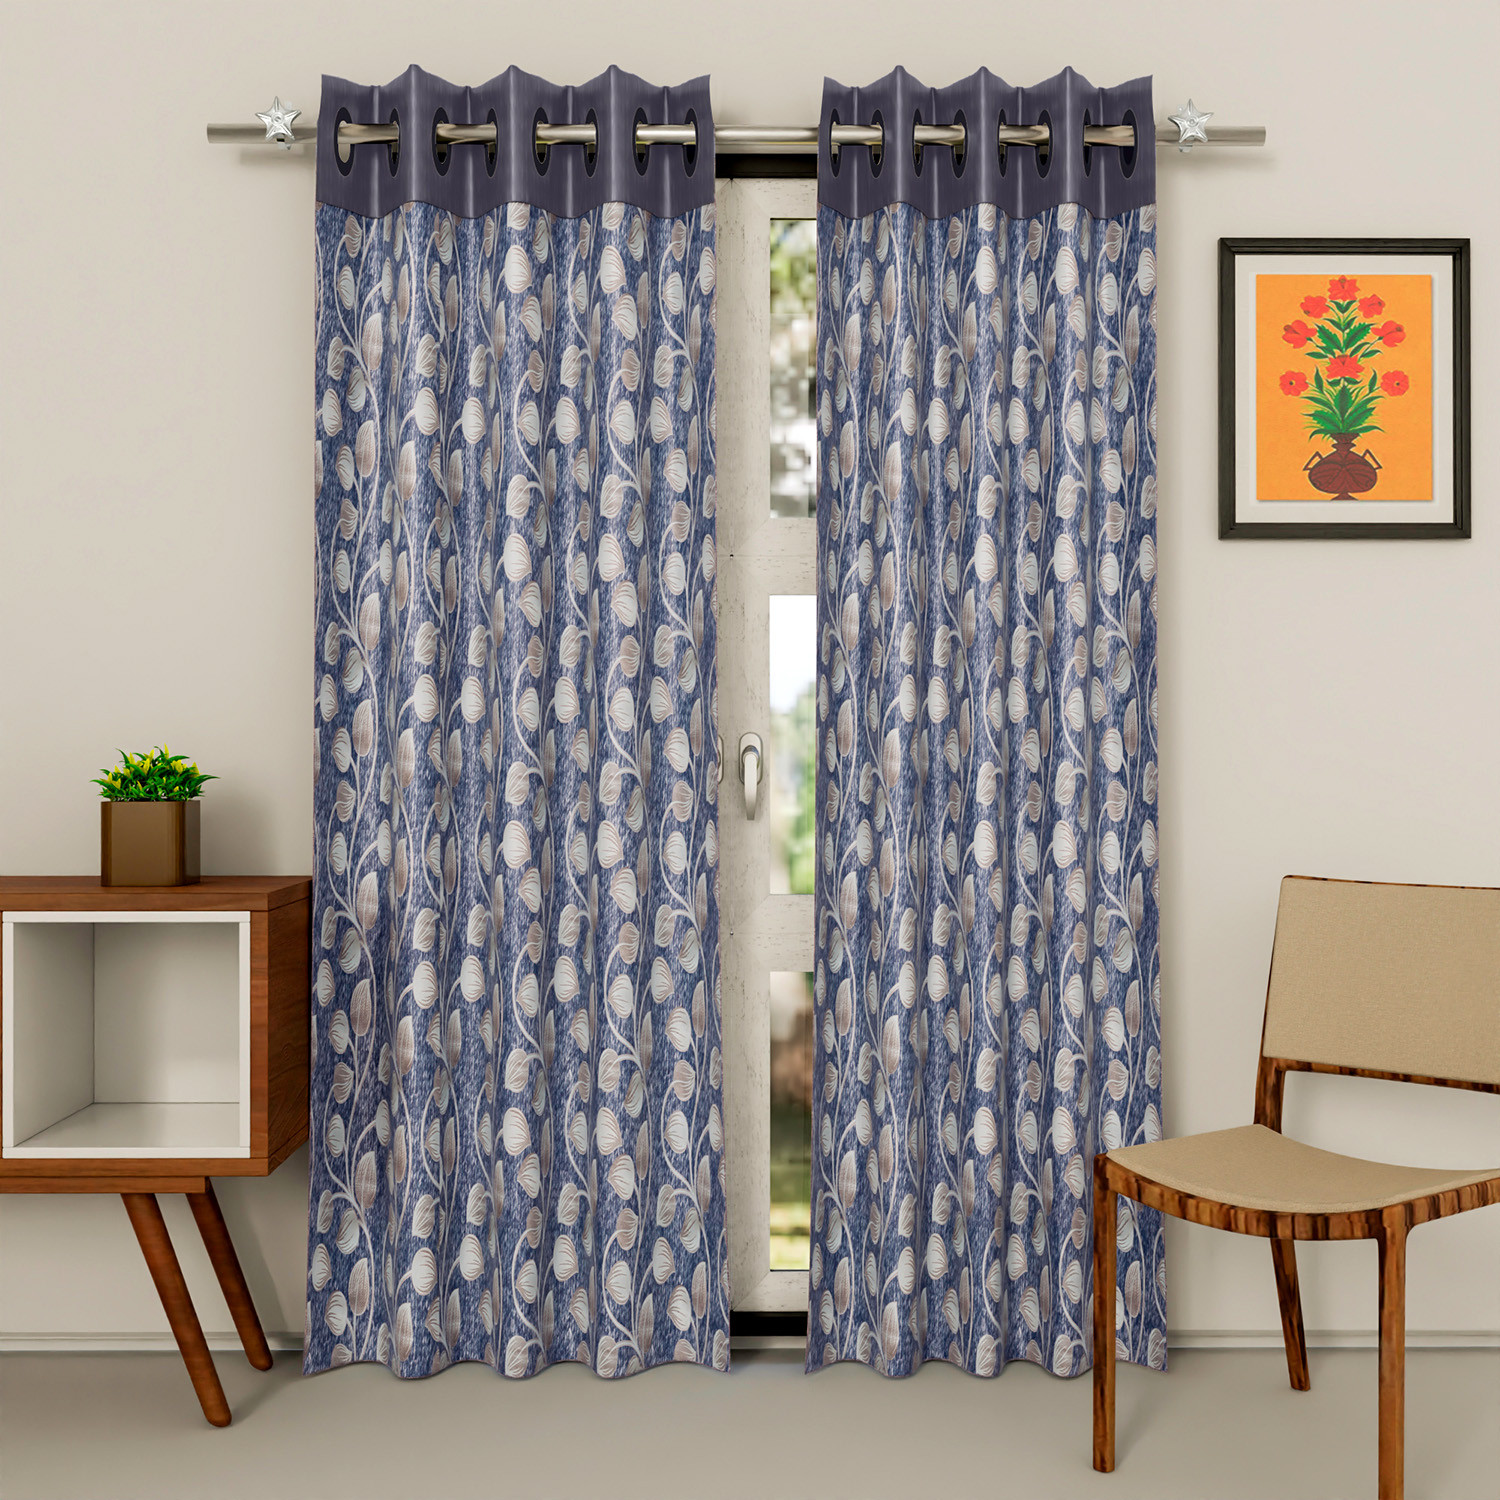 Kuber Industries Silk Decorative 7 Feet Door Curtain | Leaf Print Blackout Drapes Curtain With 8 Eyelet For Home & Office (Blue)